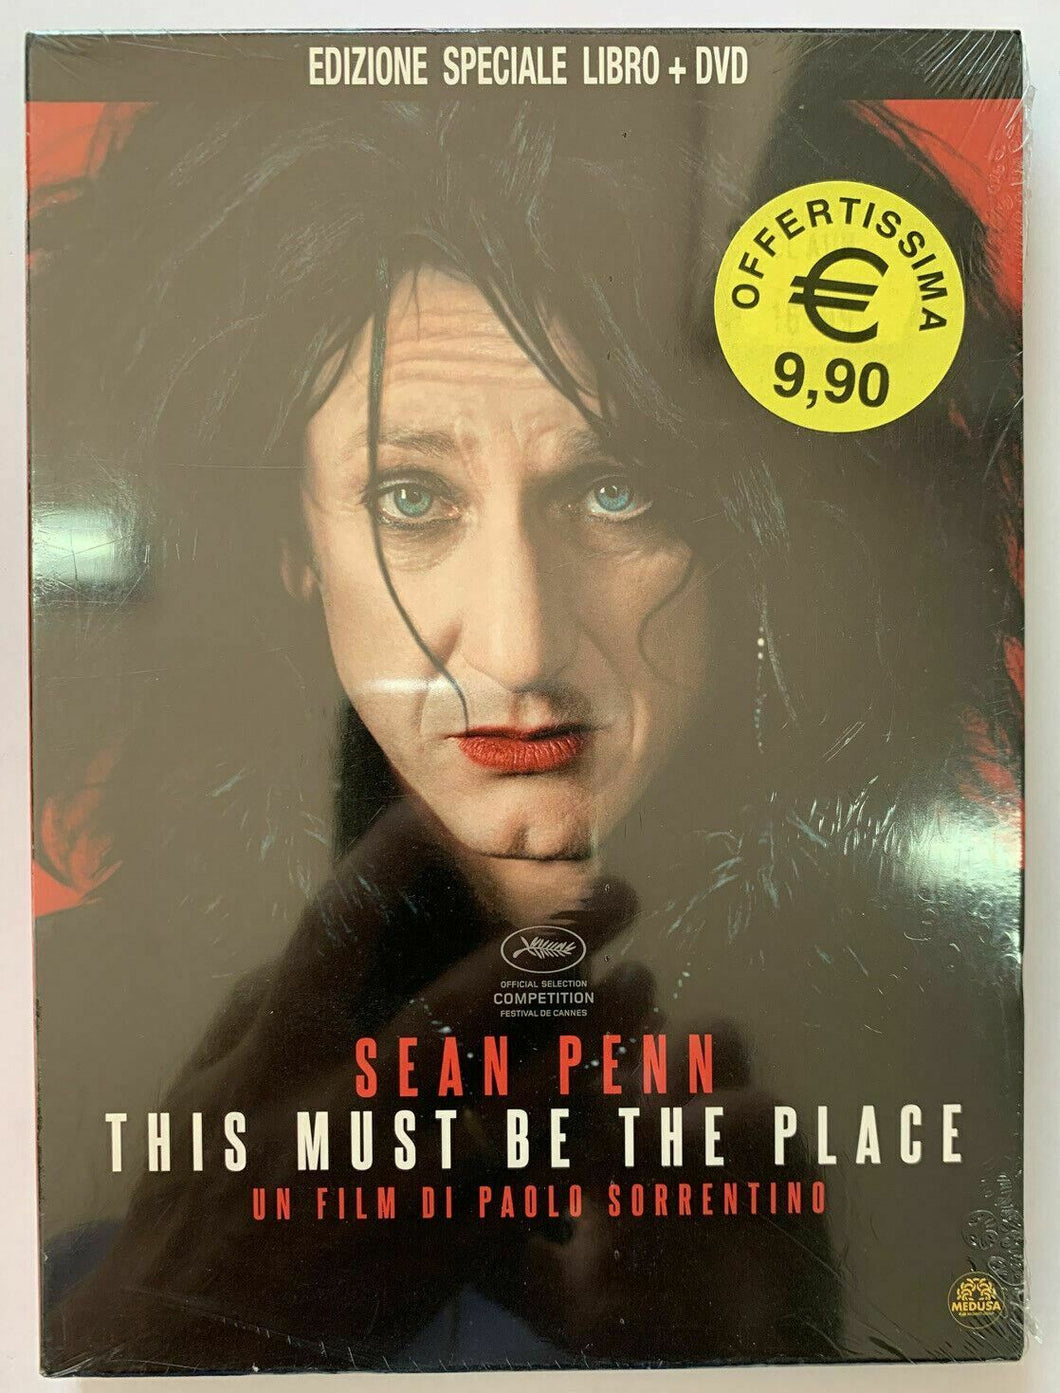 This Must Be the Place (2011) DVD + Libro Nuovo